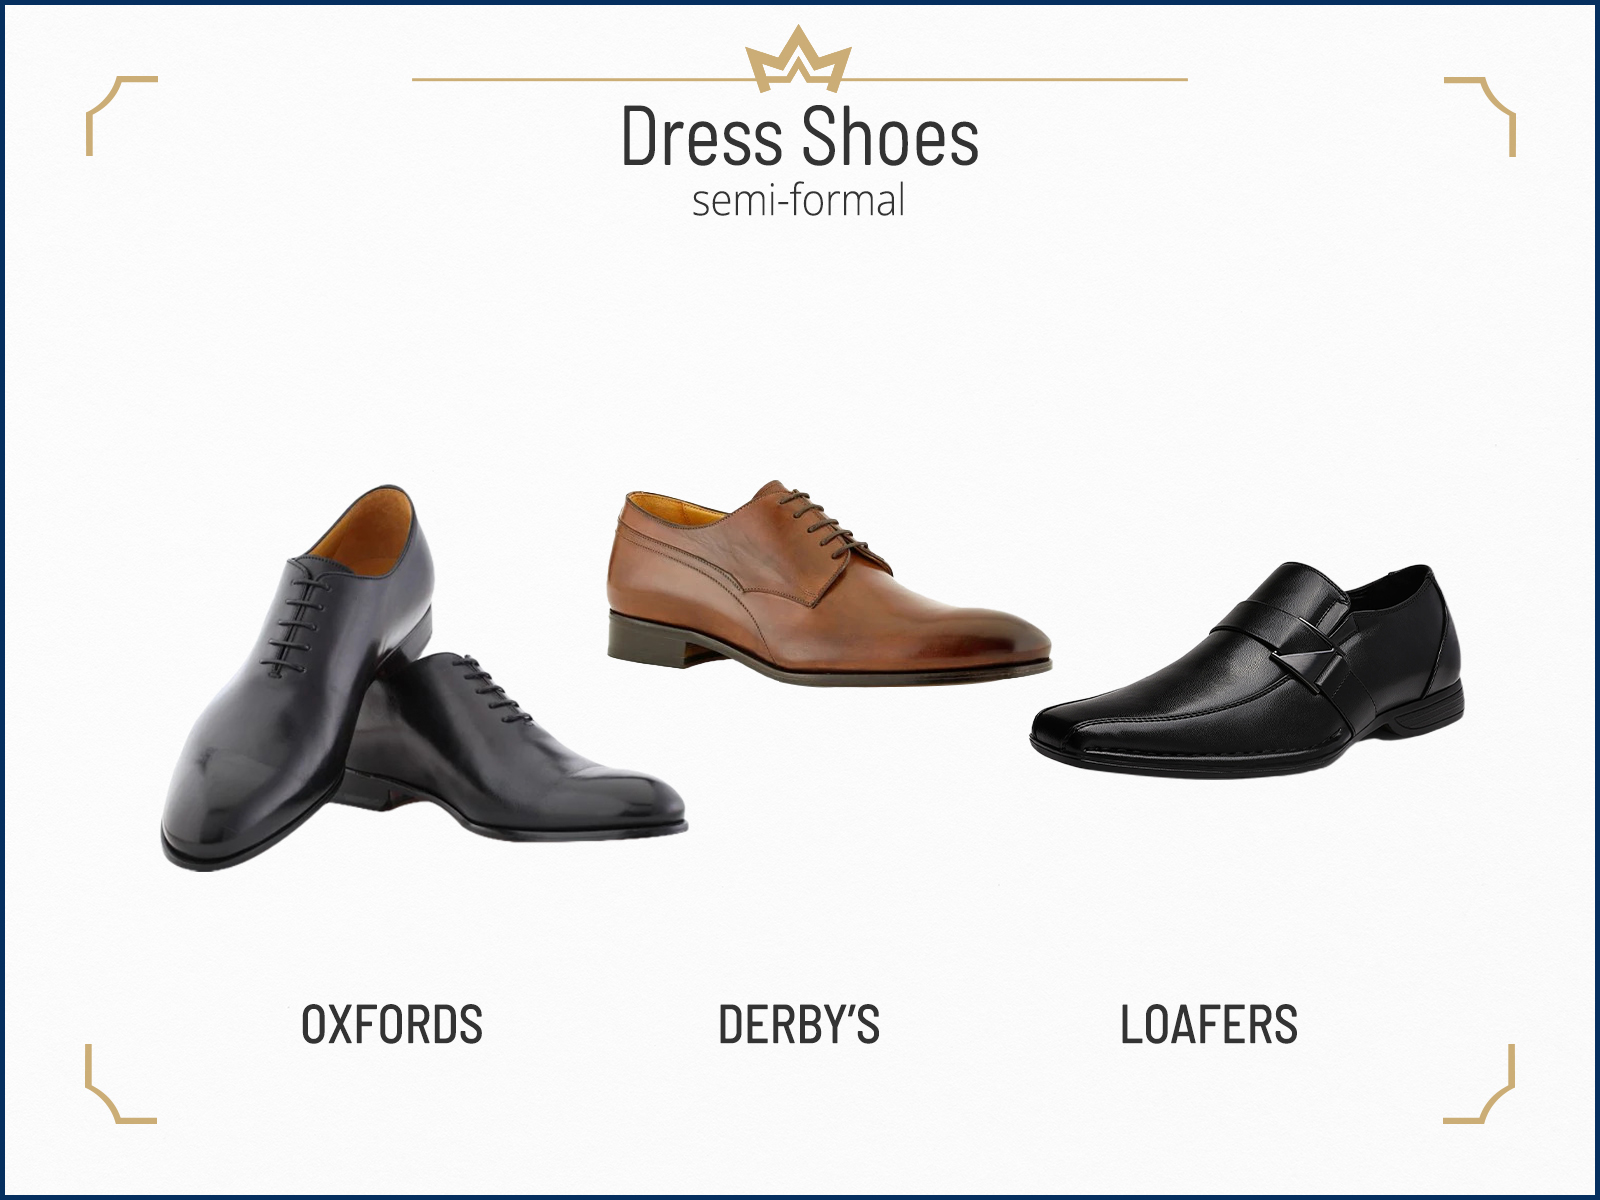 Recommended dress shoes for semi-formal events